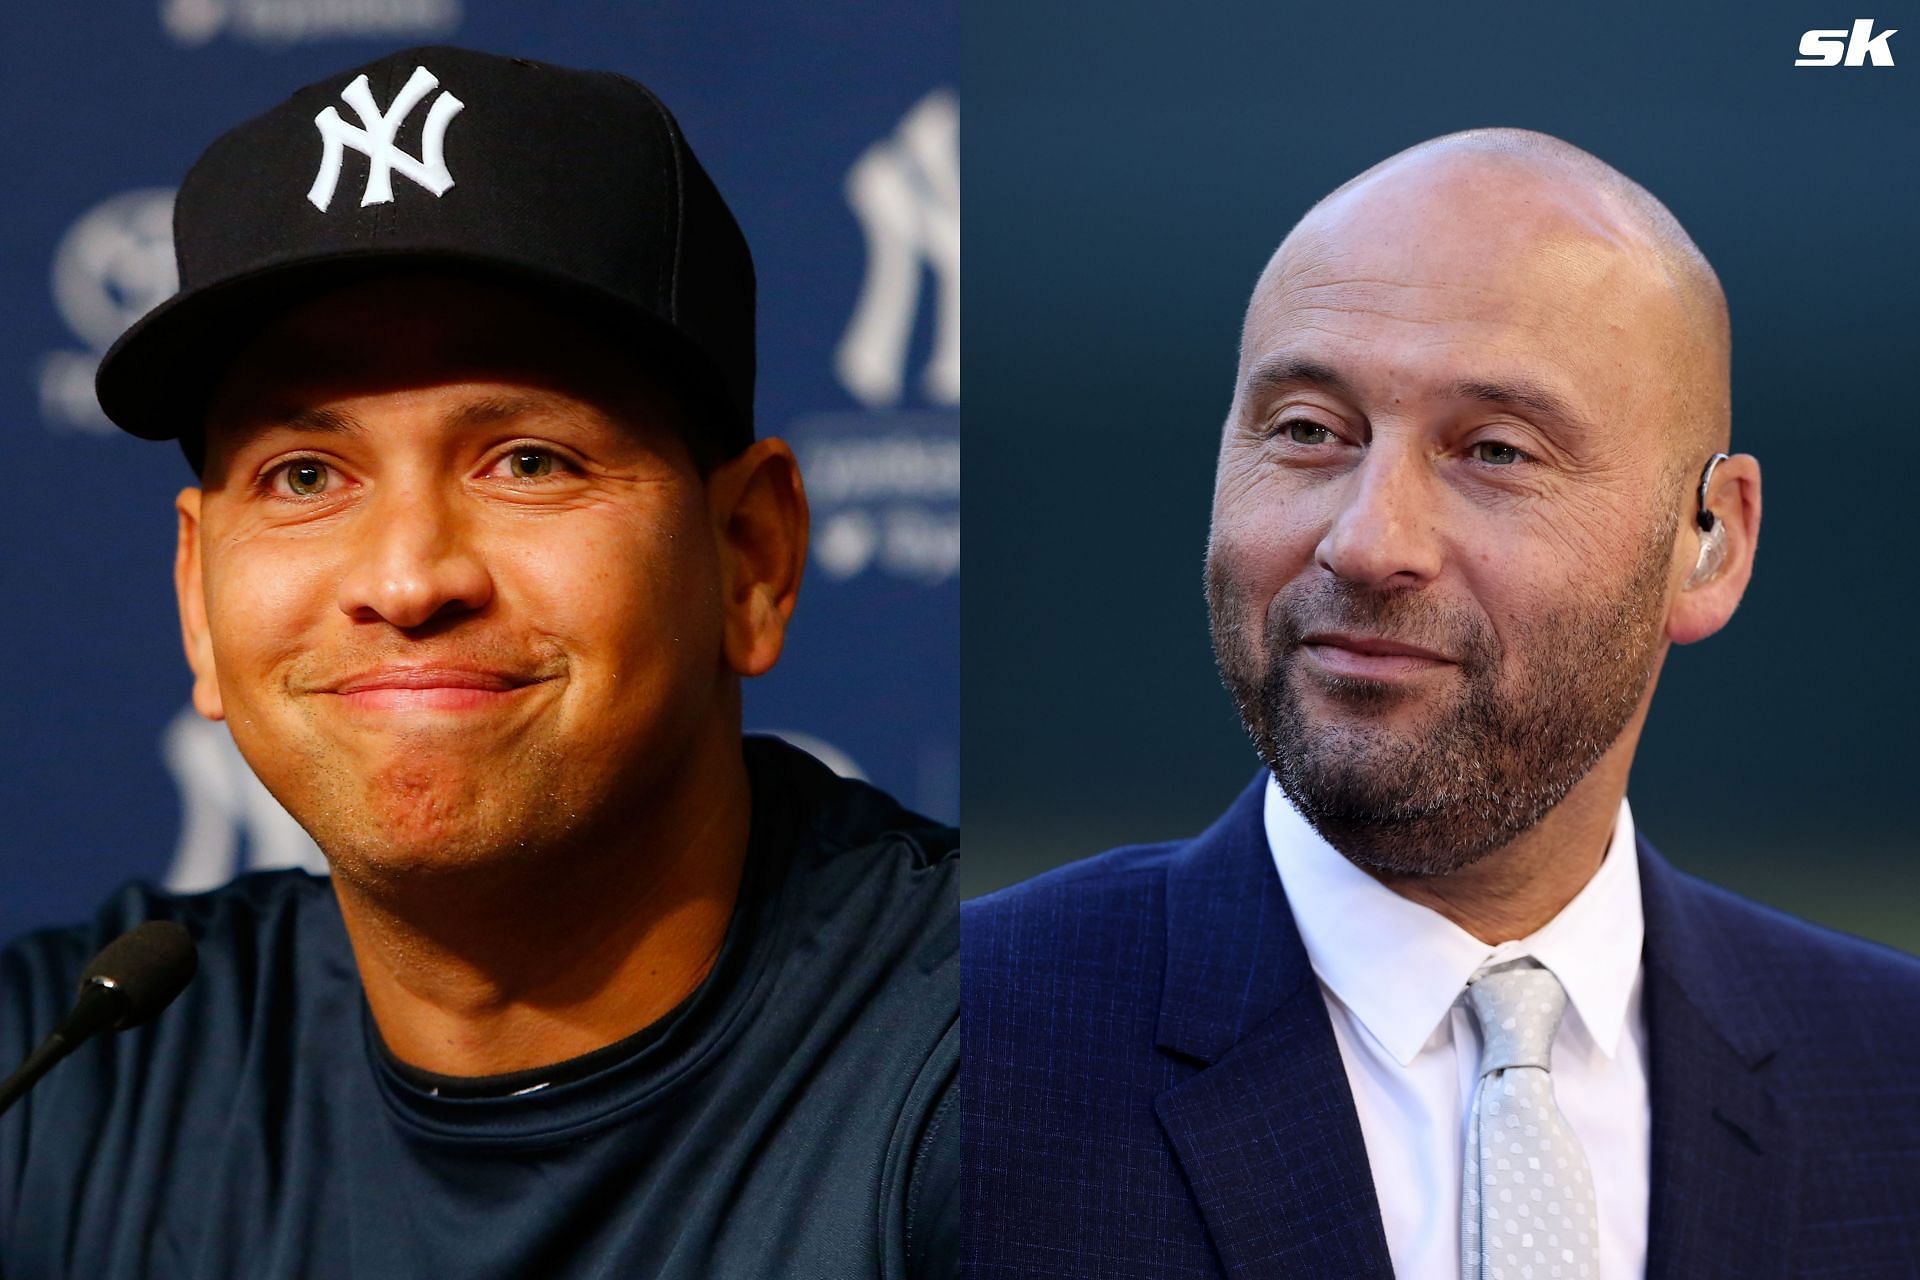 Derek Jeter jokes about Alex Rodriguez switching positions to join Yankees